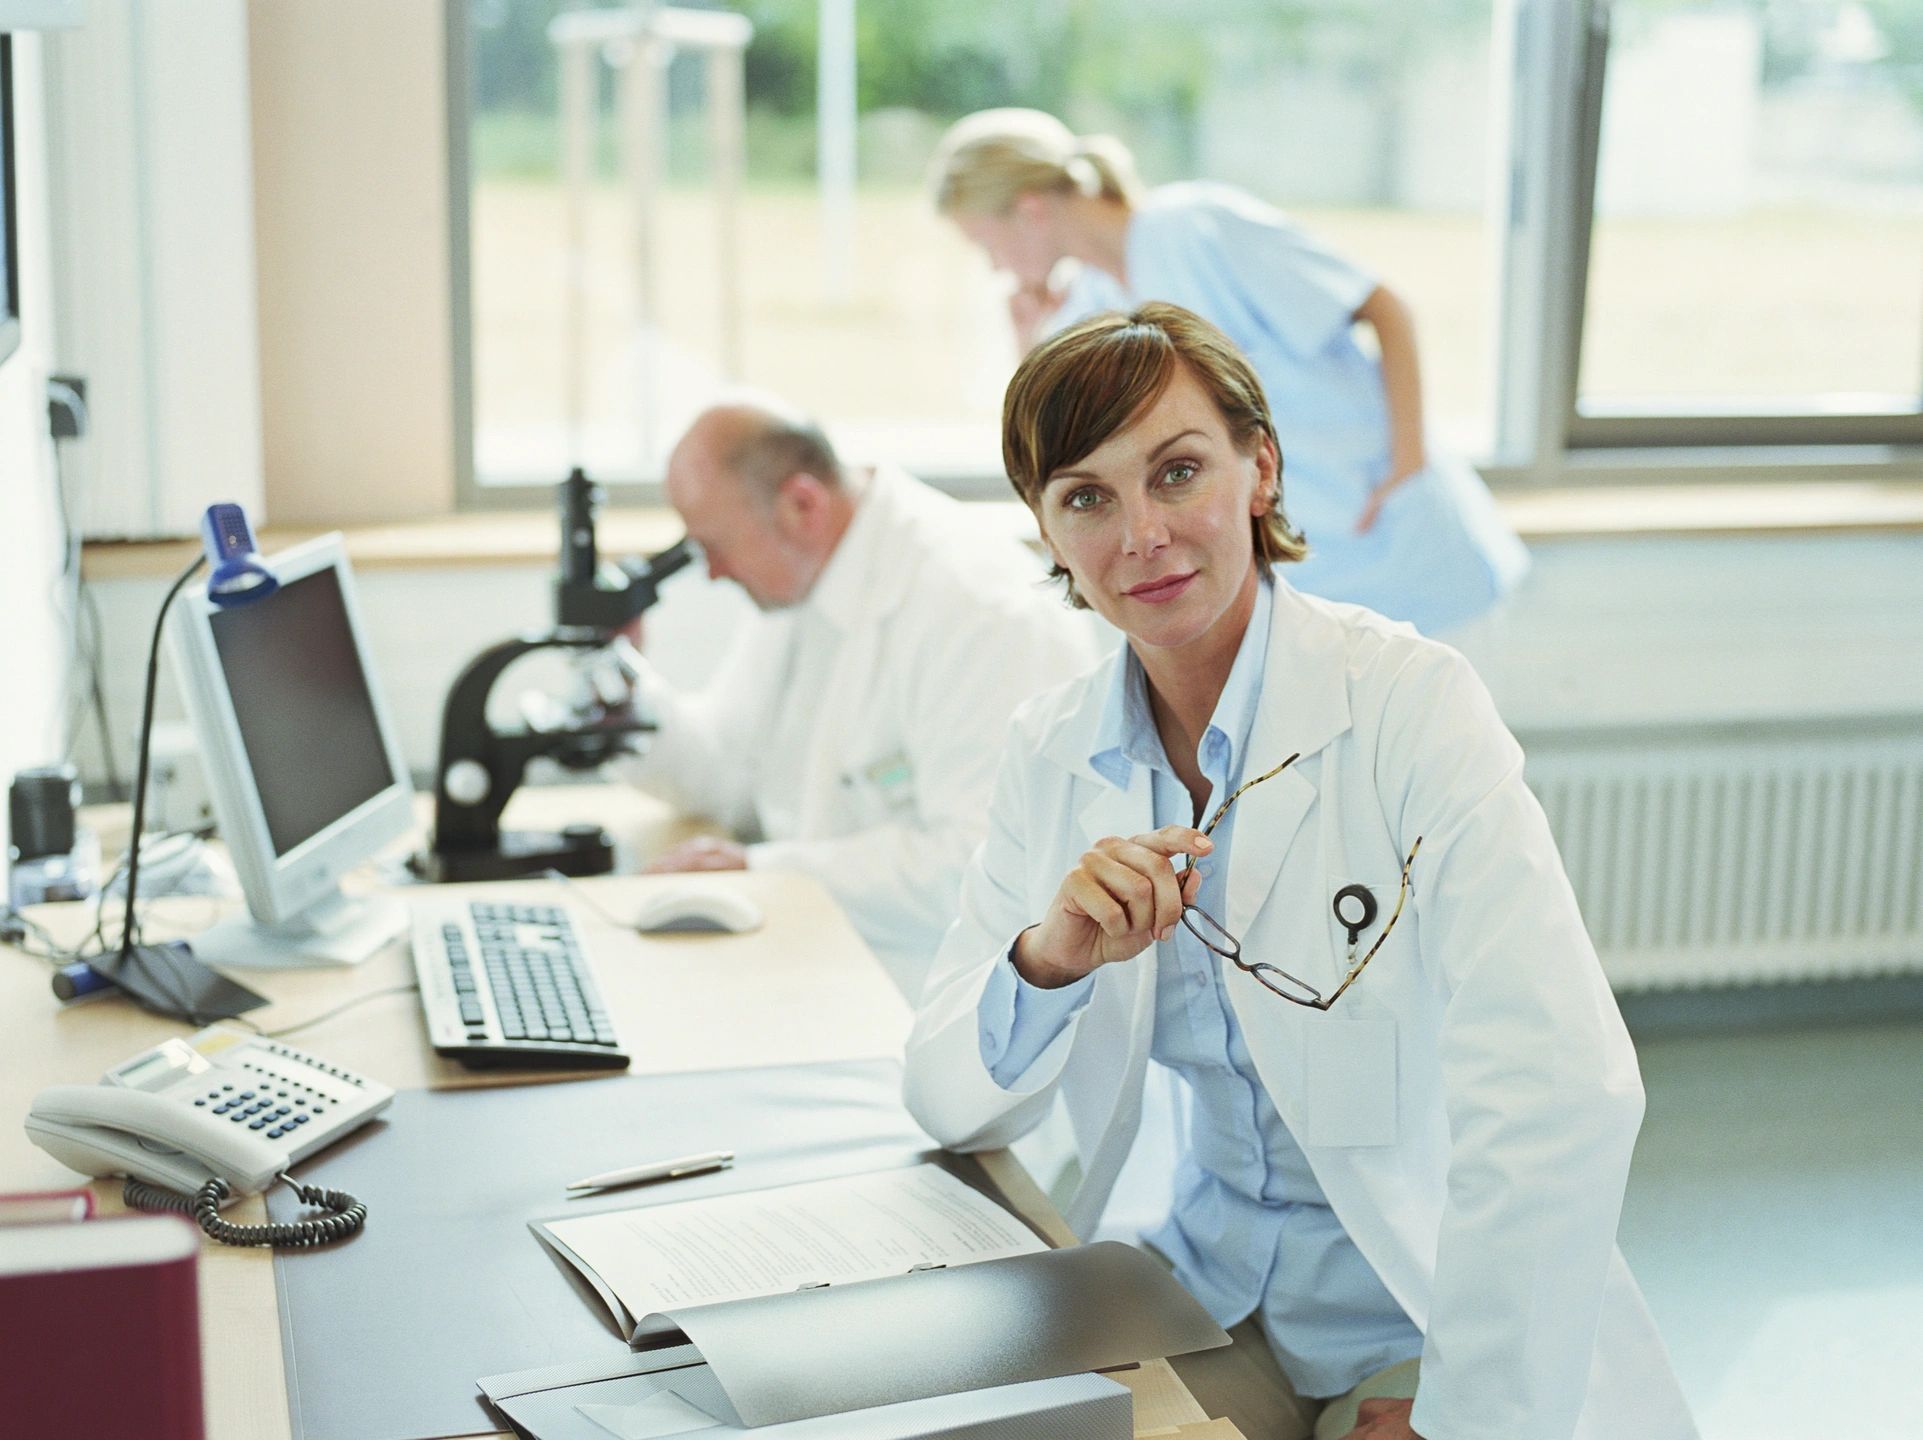 Female doctor with file in front of them with two other doctors at a microscope in the background.